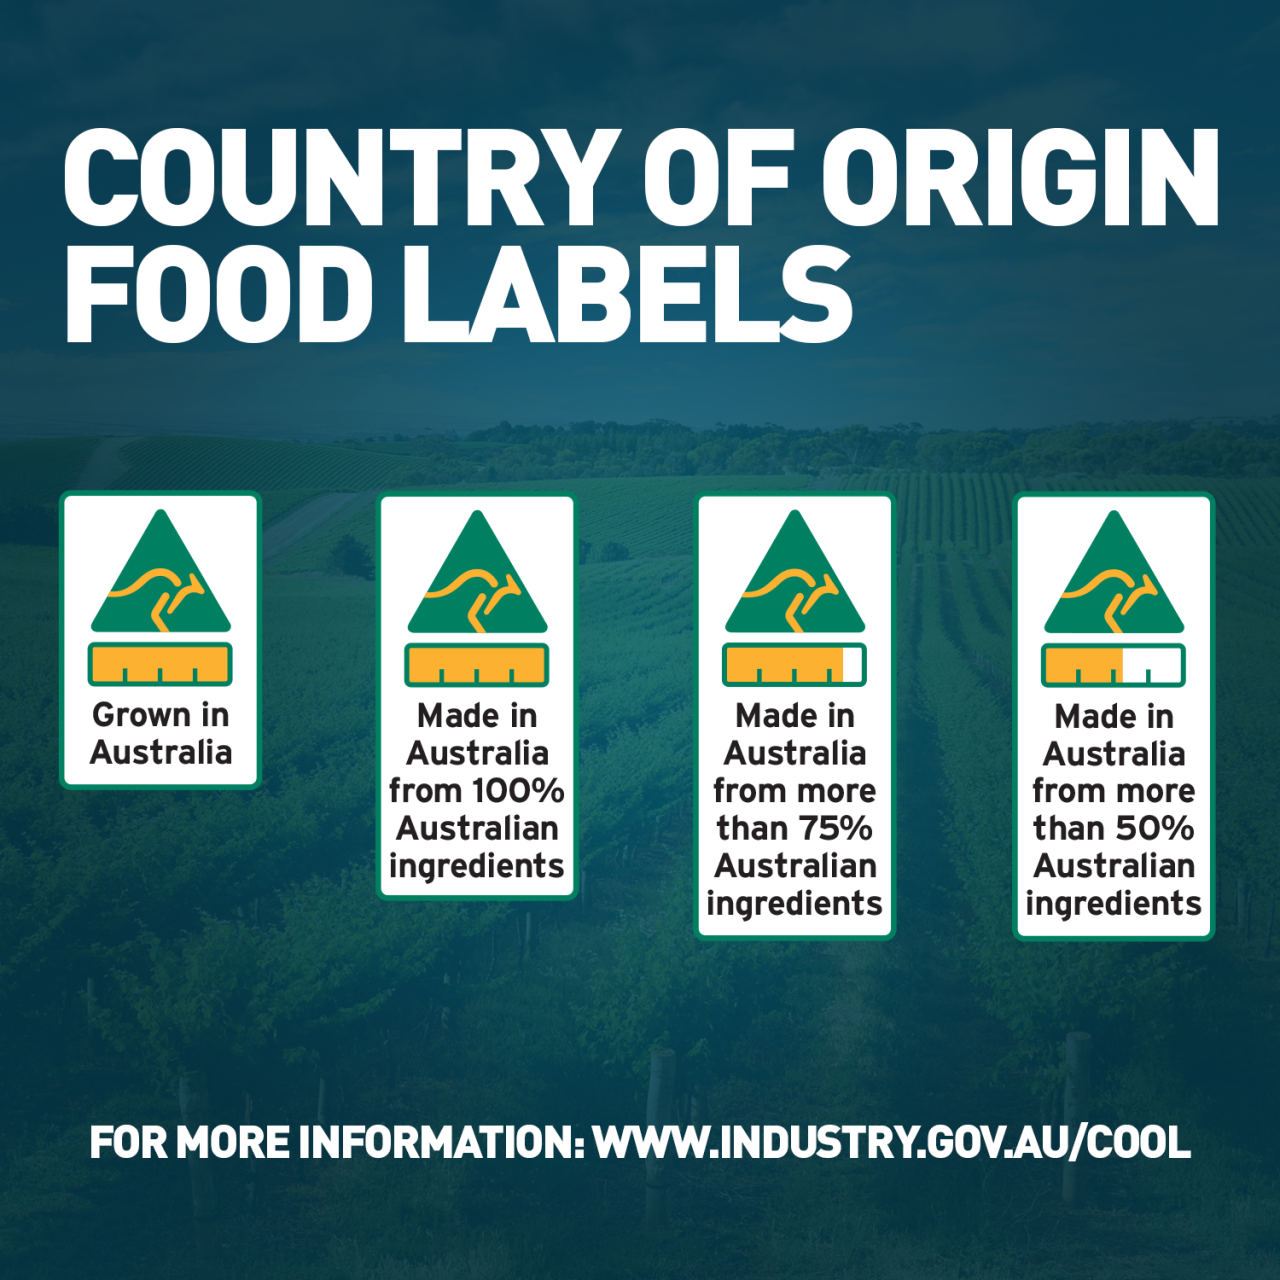 Country of Origin Food Labelling